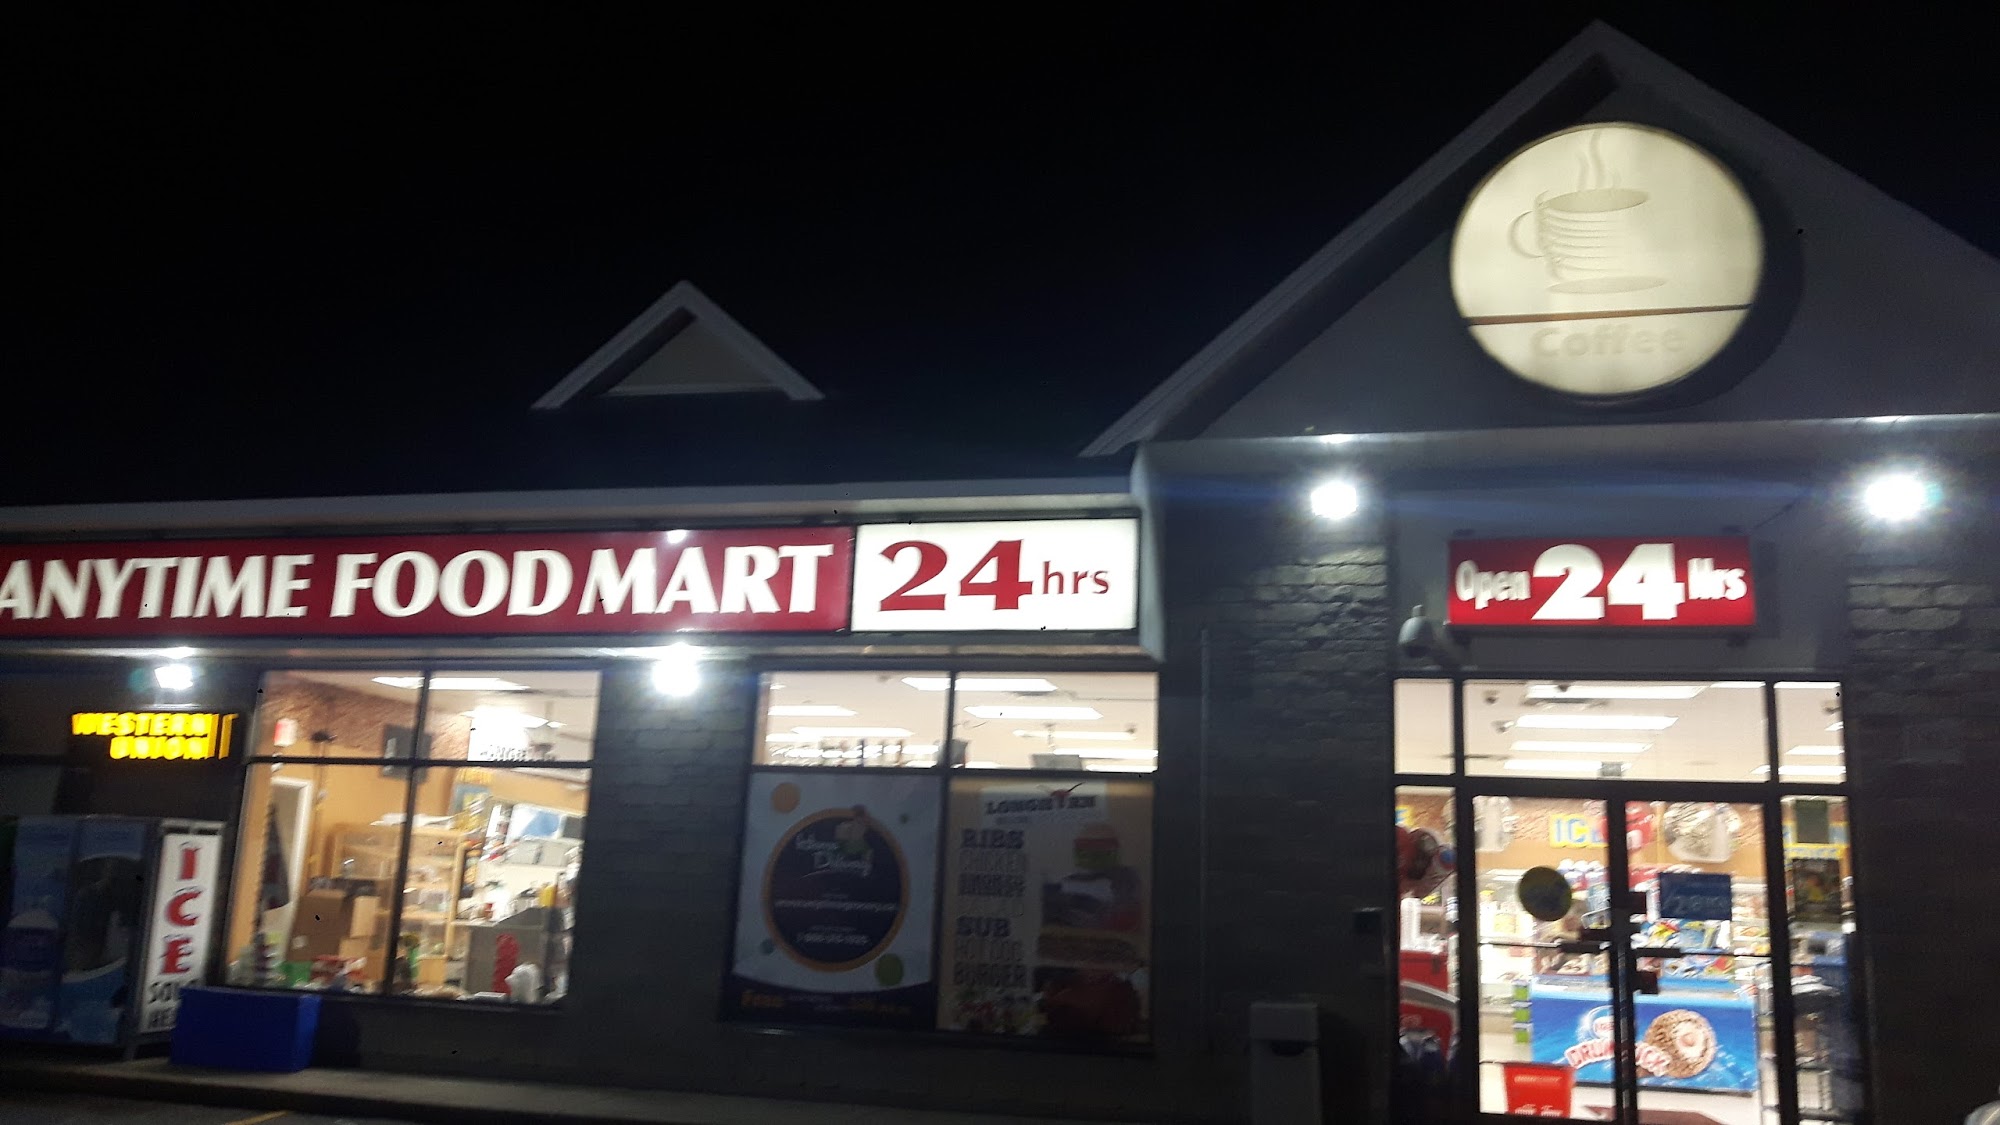 Anytime Food Mart